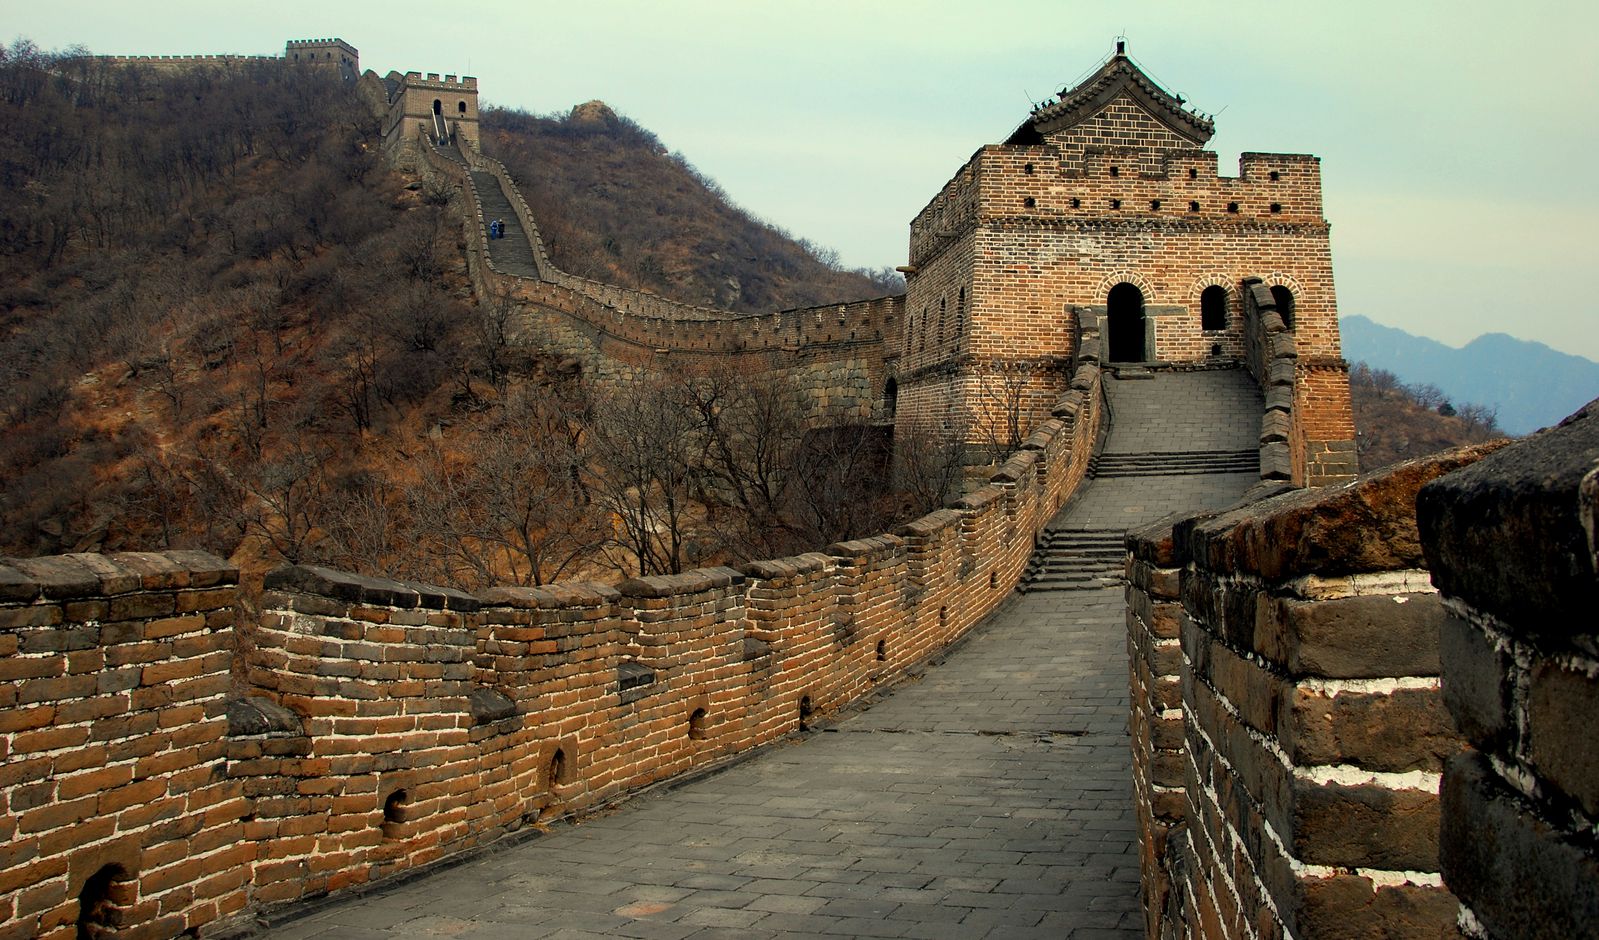 Greate wall of China